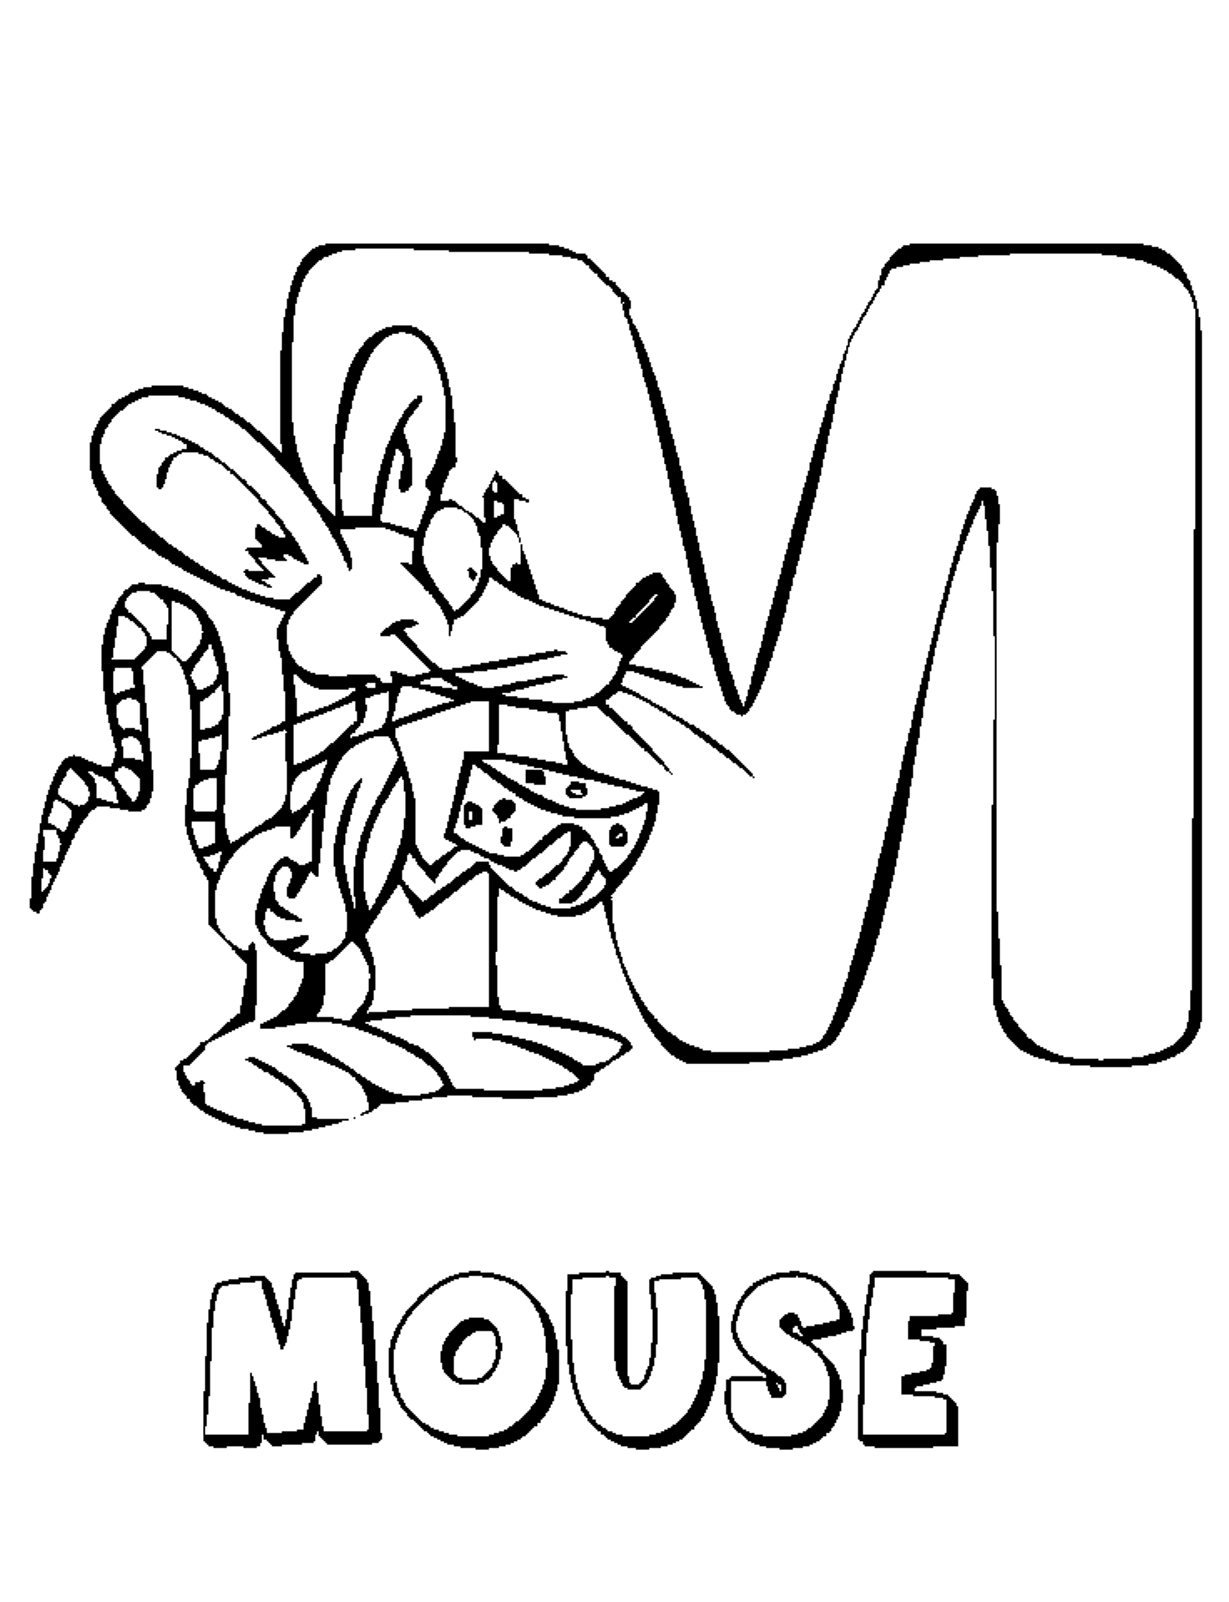 Mouse Alphabet Coloring Pages Printable | Alphabet Coloring pages ...